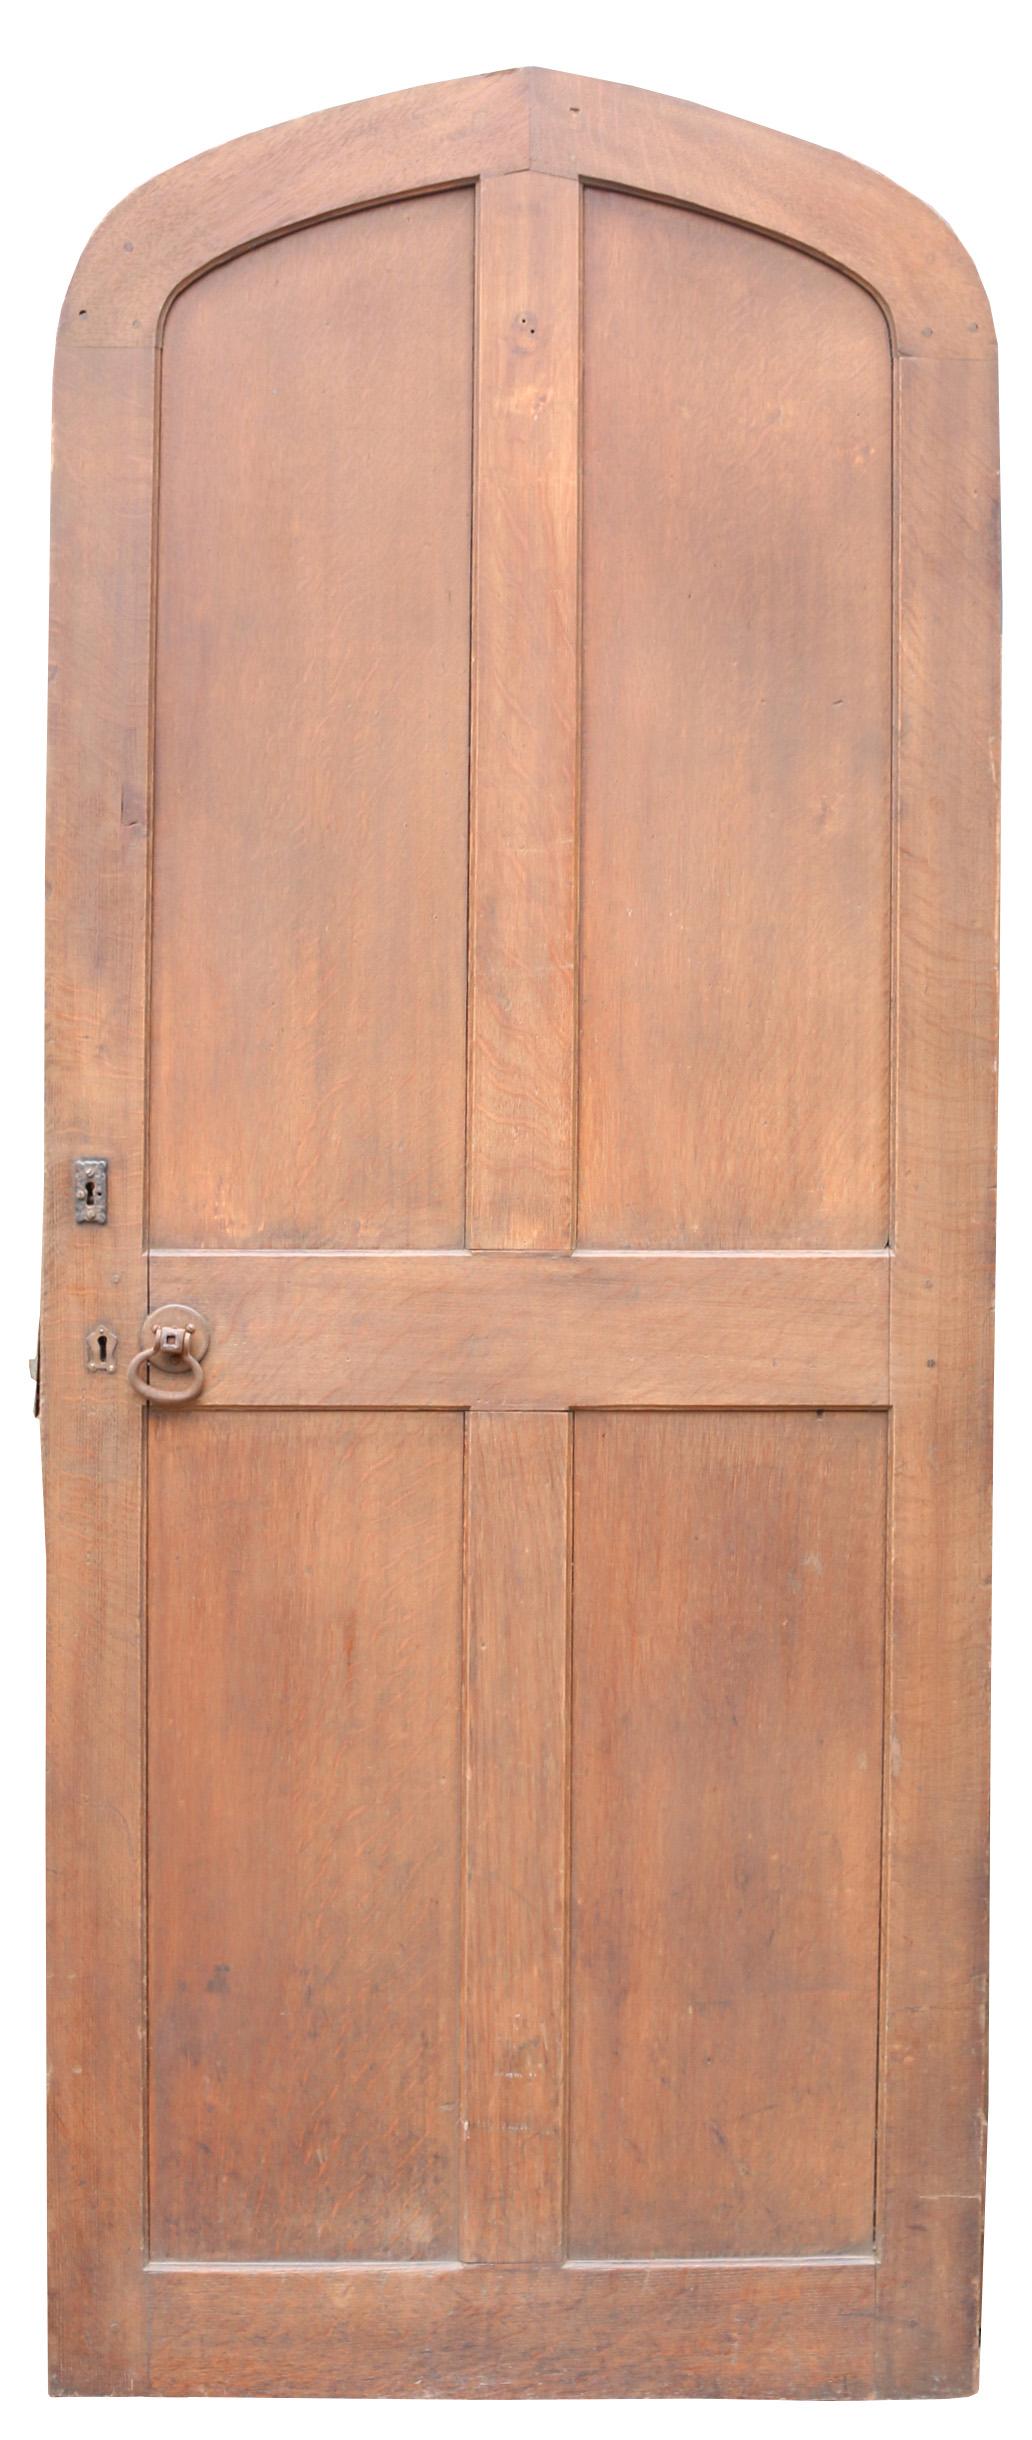 Can be used as an interior or exterior door.

There are some knocks and abrasions, normal for doors of this age.

Height 212 cm

Width 86 cm

Depth 4.5 cm

Weight 38 kg